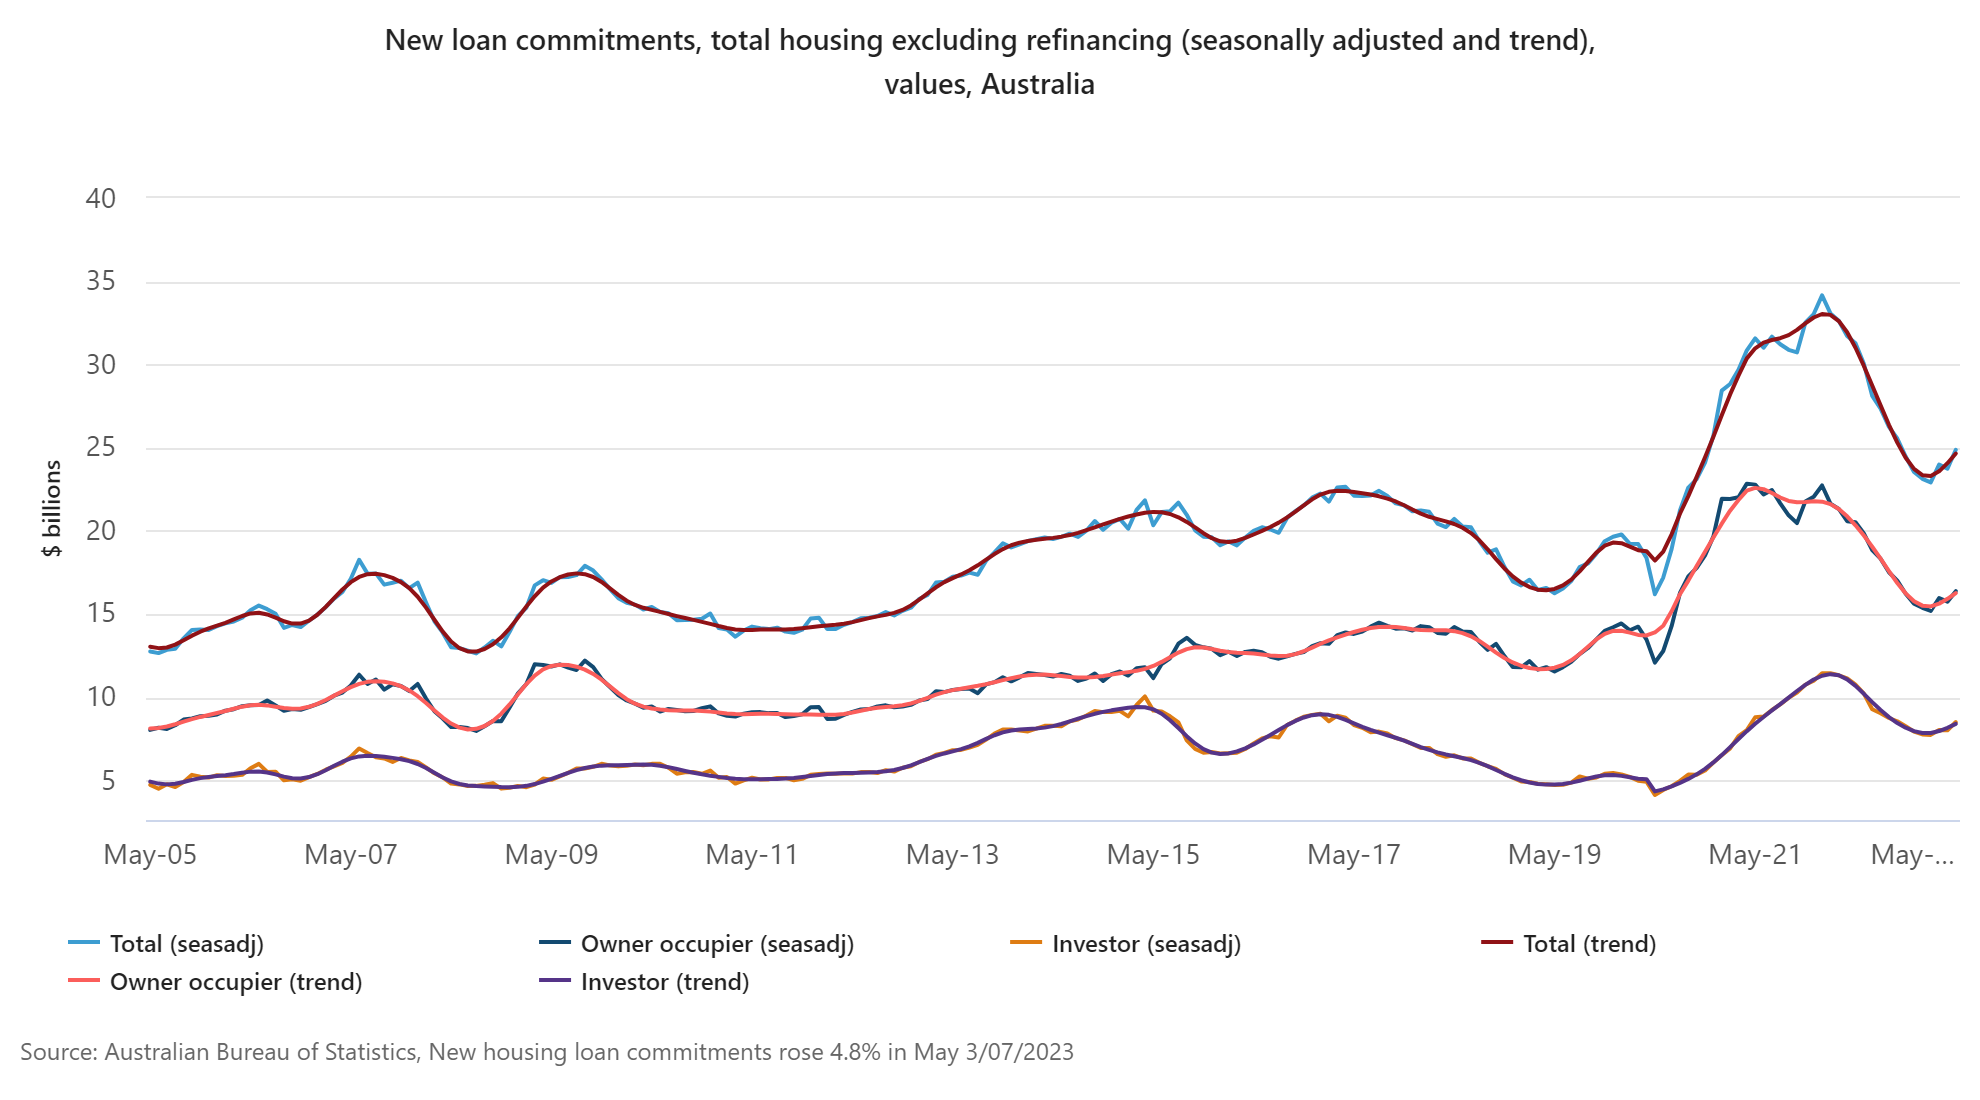 Graph showing new loan commitments for total housing, excluding refinancing 